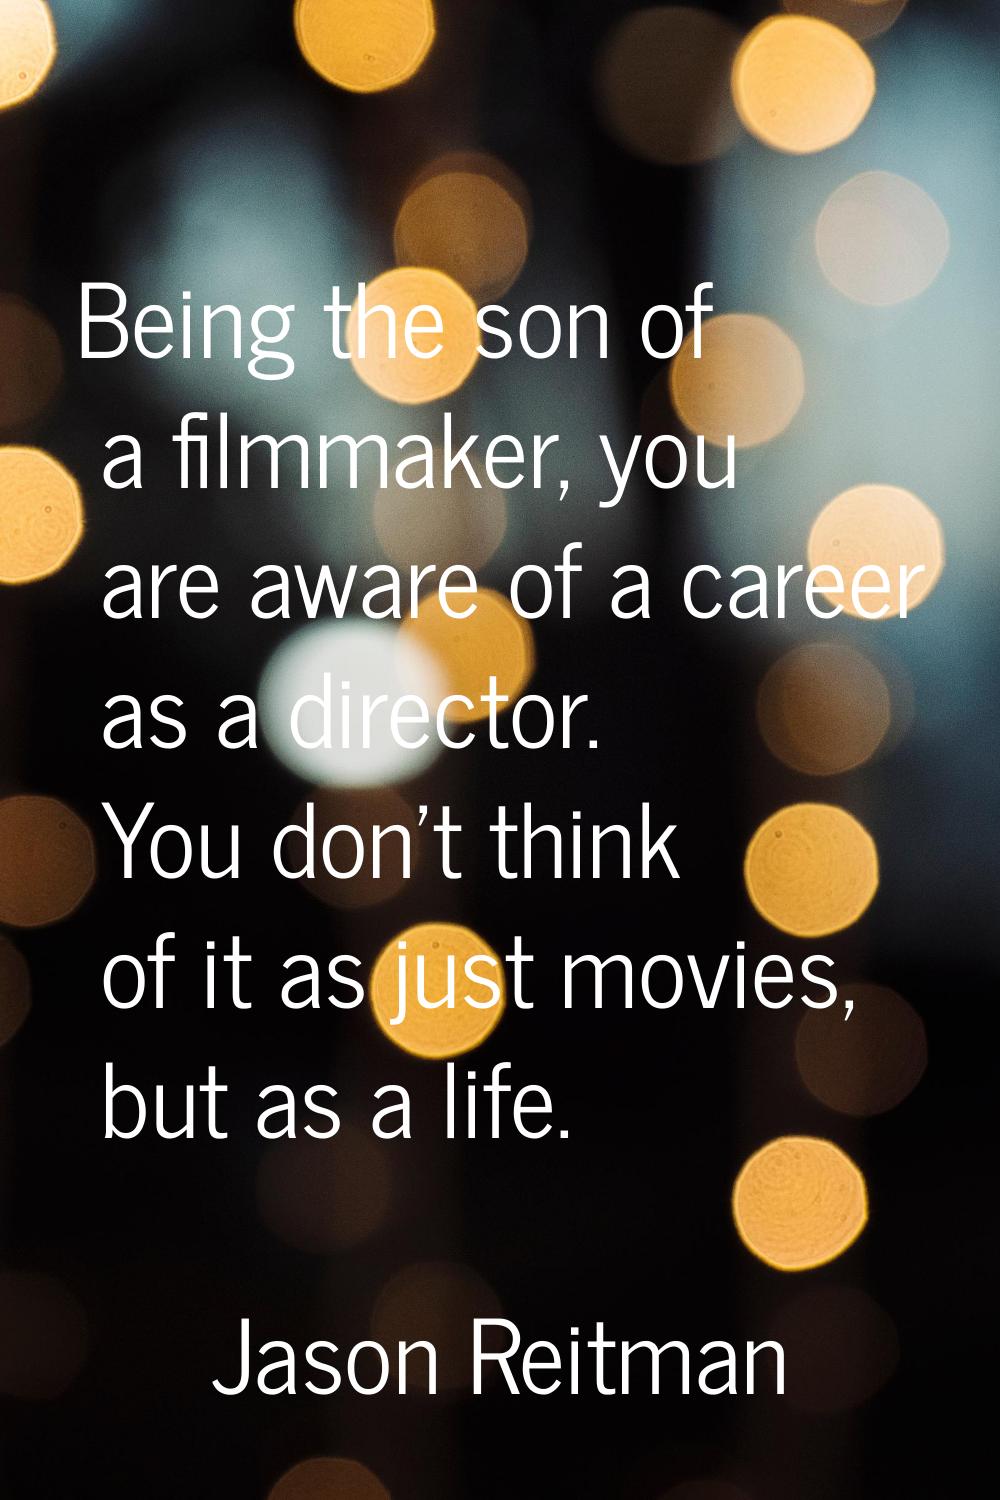 Being the son of a filmmaker, you are aware of a career as a director. You don't think of it as jus